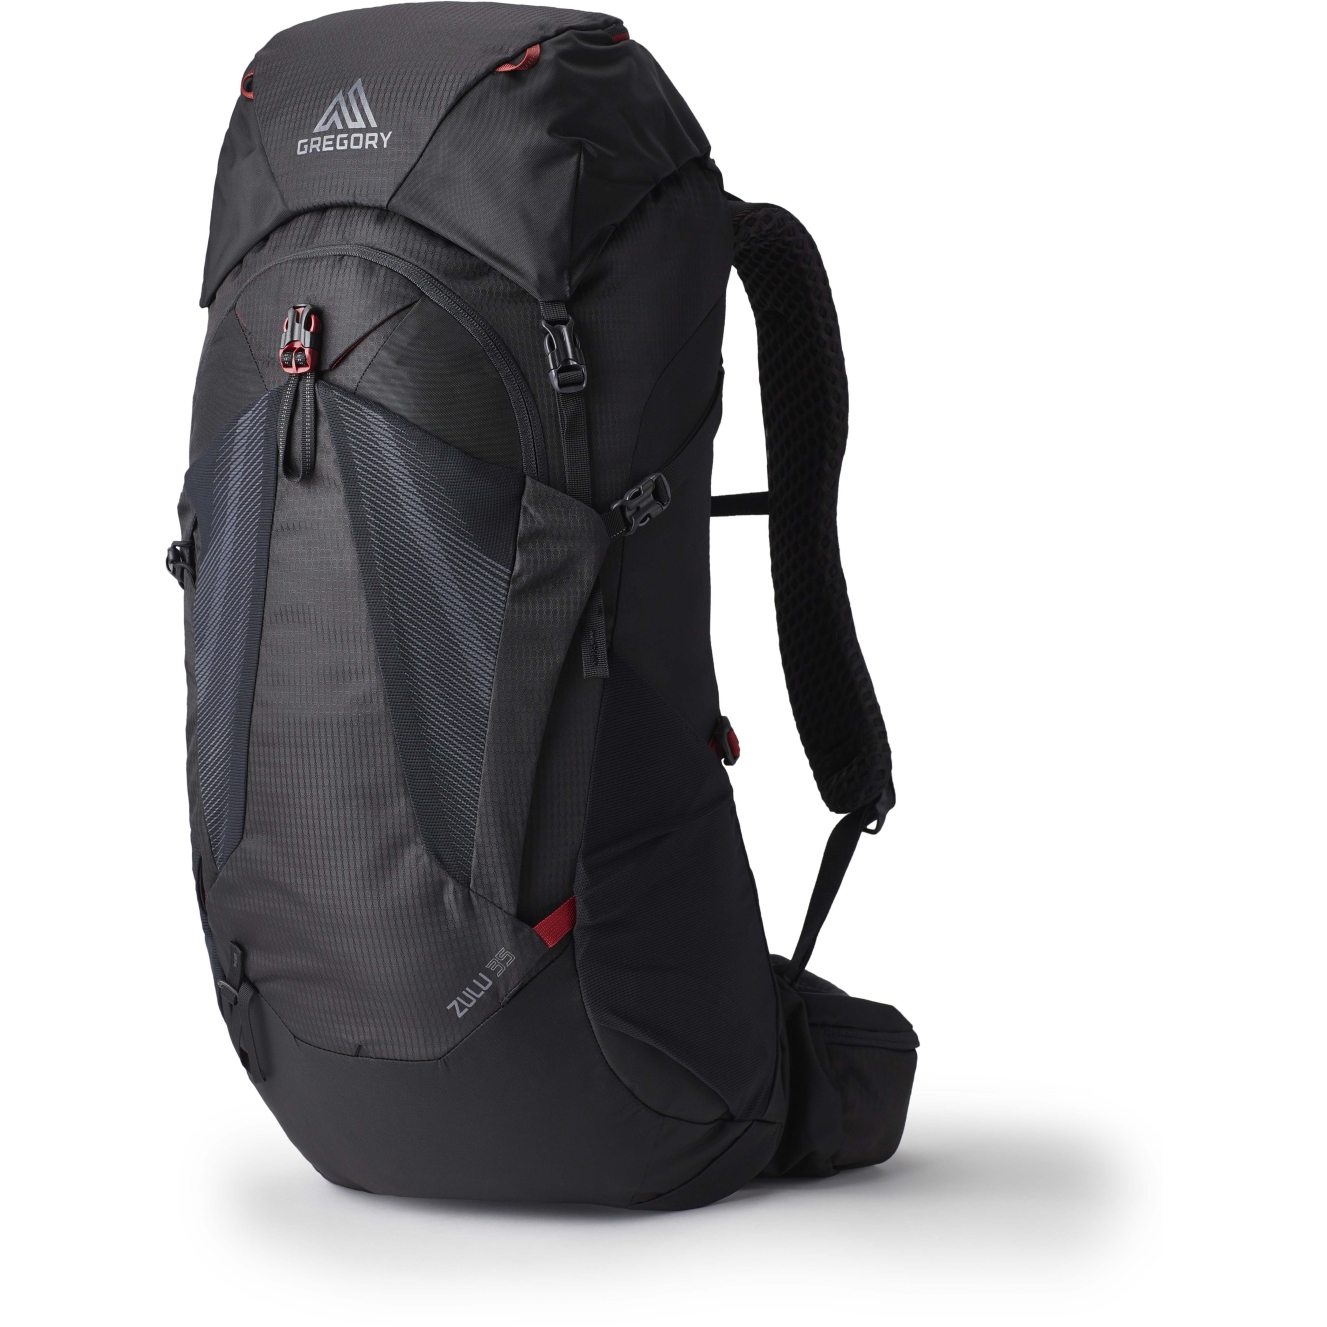 Picture of Gregory Zulu 35 Backpack - Volcanic Black